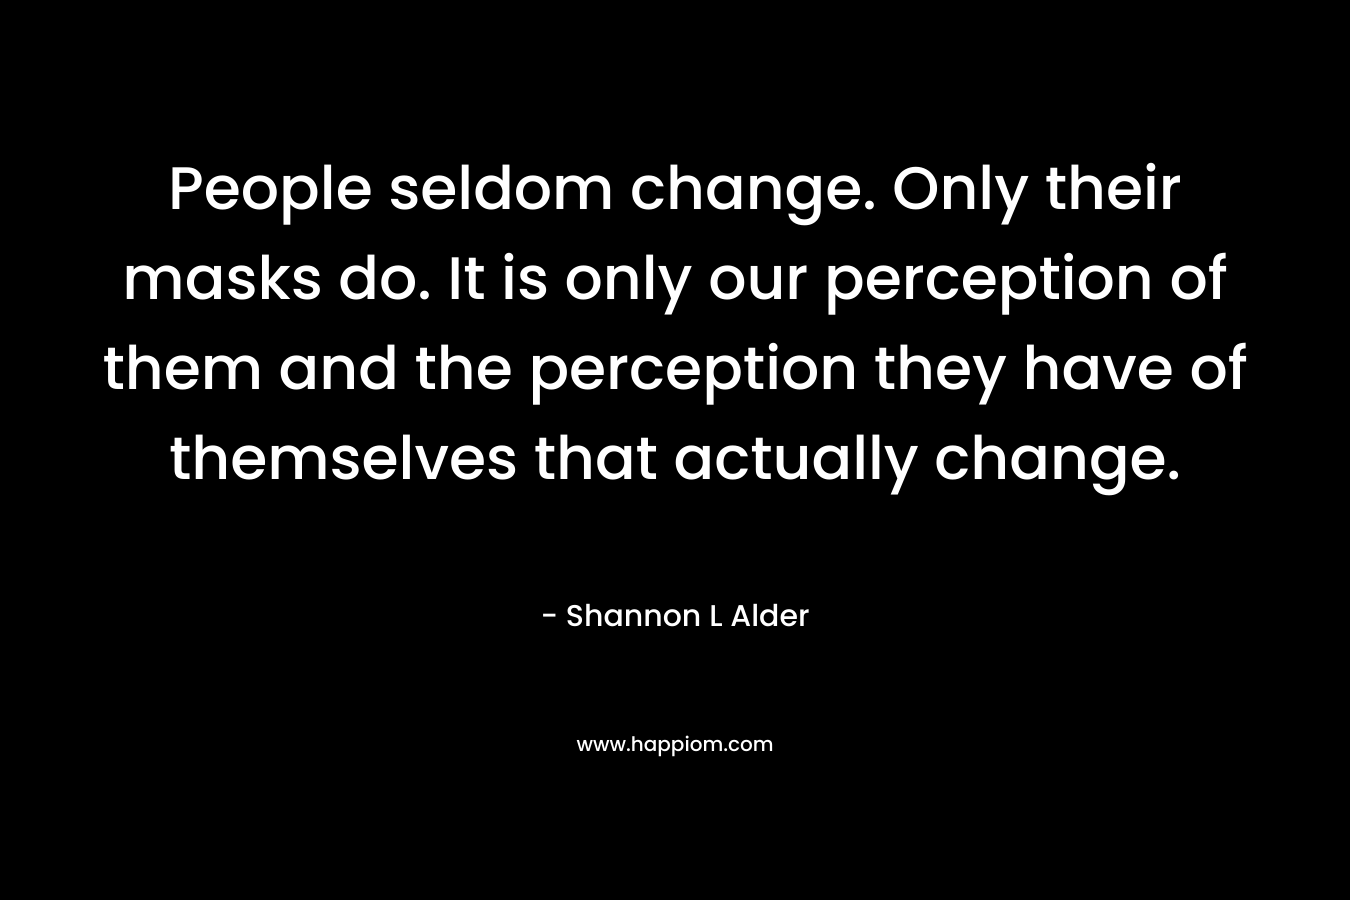 People seldom change. Only their masks do. It is only our perception of them and the perception they have of themselves that actually change.